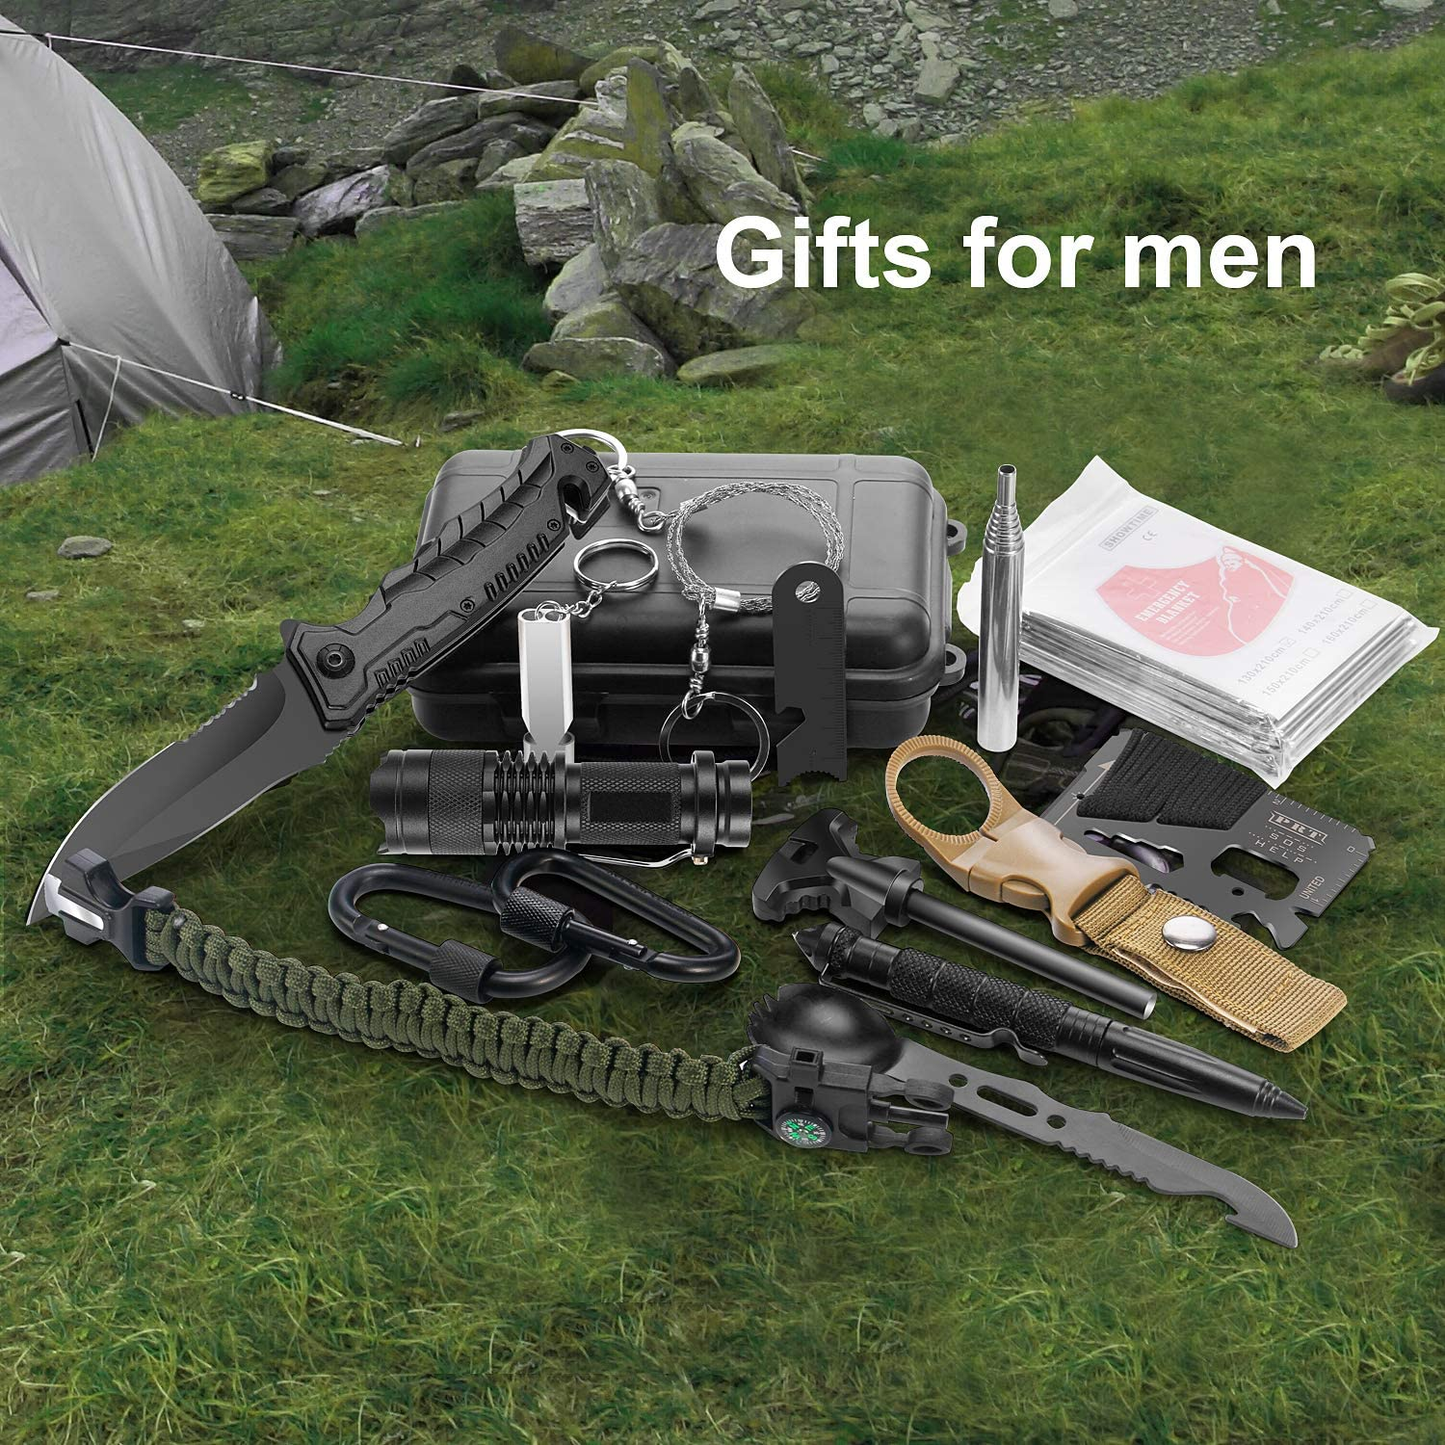 Survival Kit, 16 in 1 Professional Survival Gear Tool Emergency Tactical First Aid Equipment Supplies Kits Gifts Idear for Men Him Women Families Hiking Camping Fishing Adventures